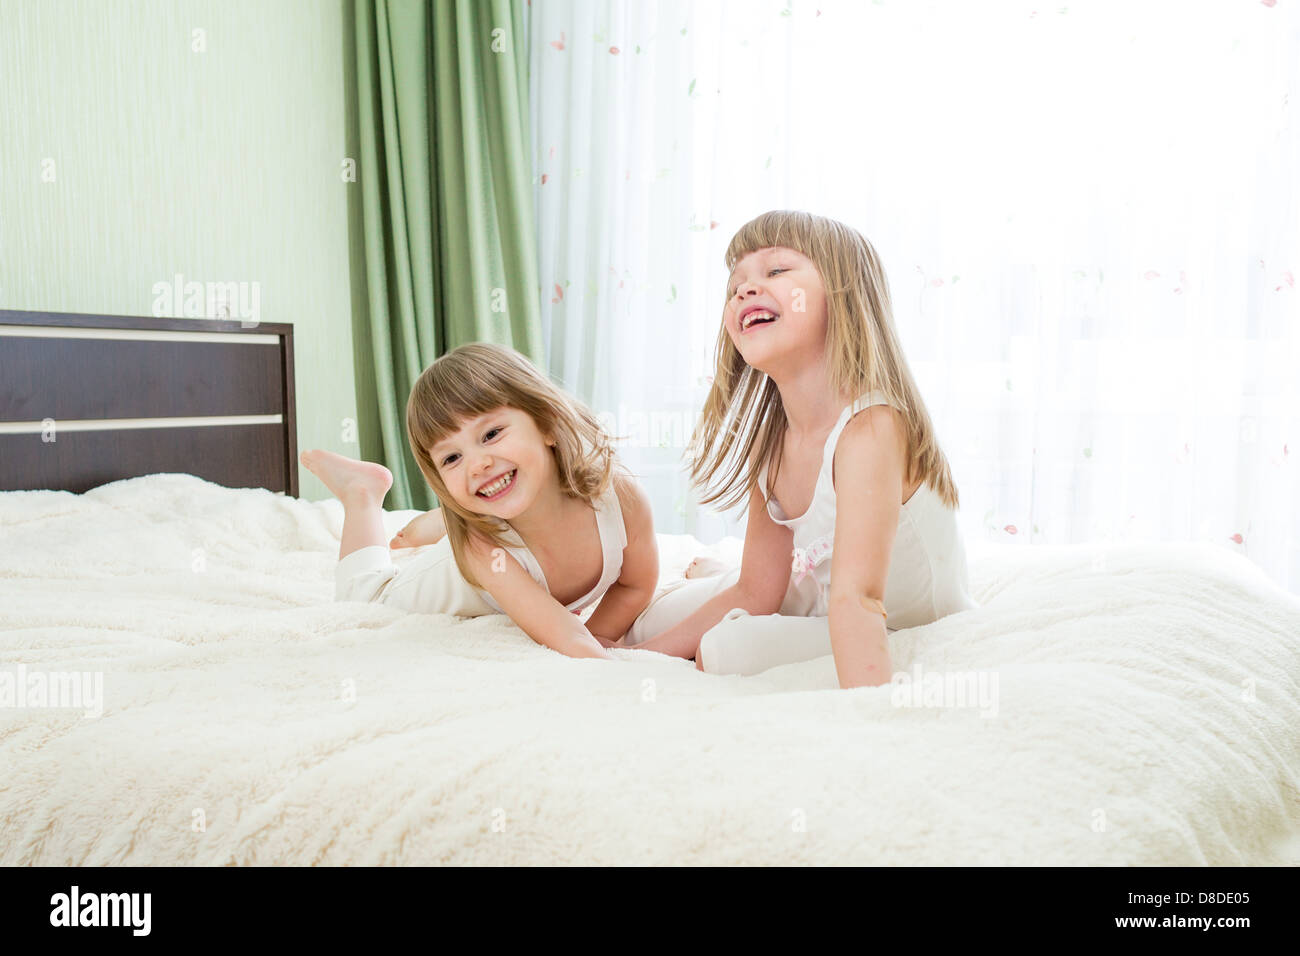 Two little girls lying on bed Stock Photo